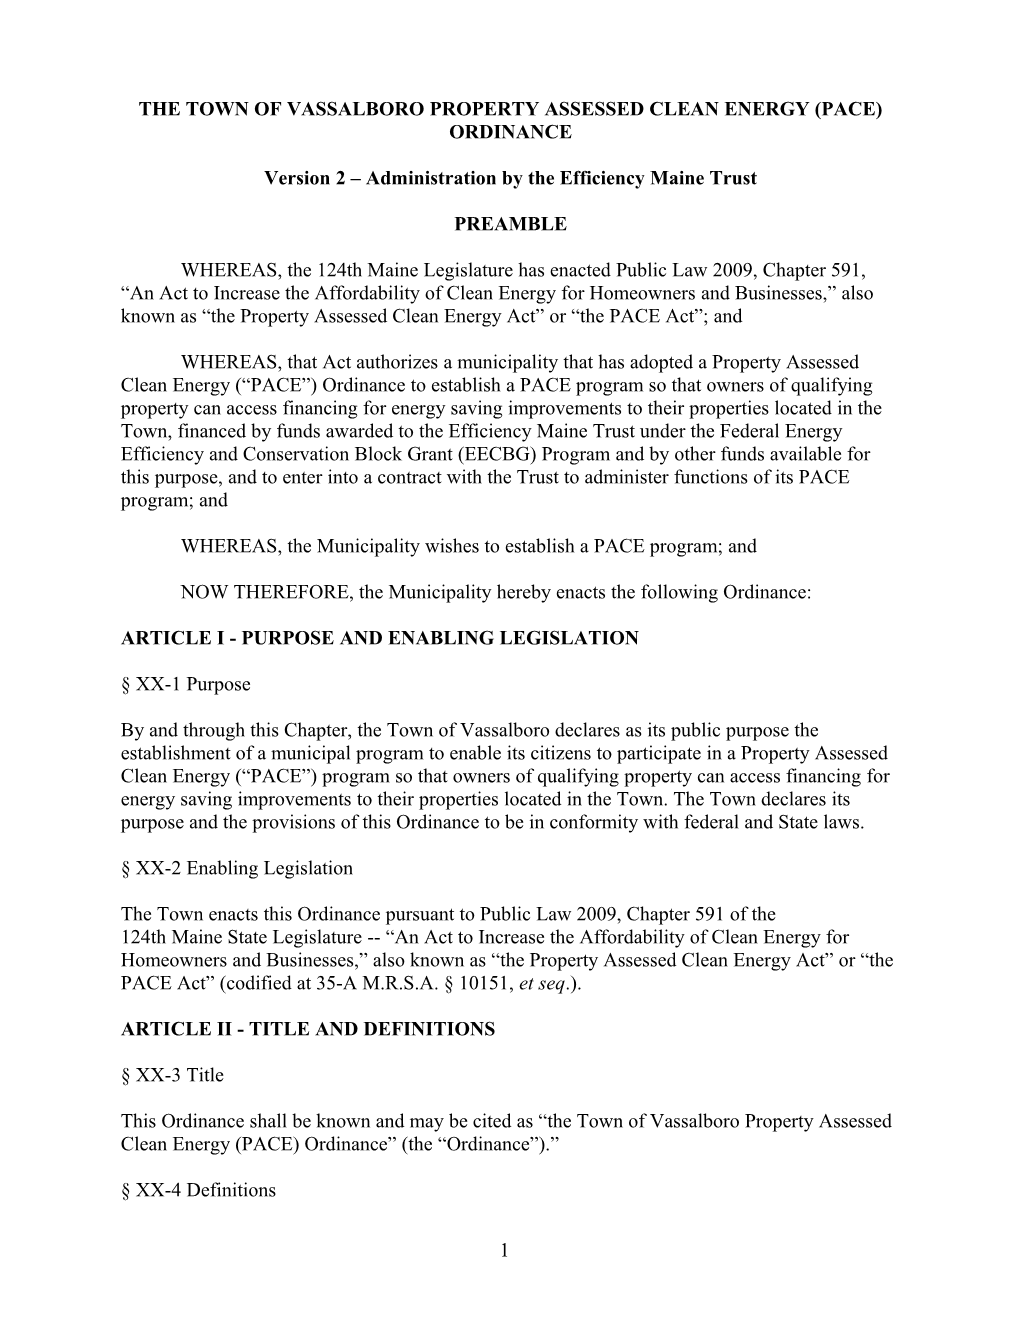 The Town of Vassalboro Property Assessed Clean Energy (PACE) Ordinance